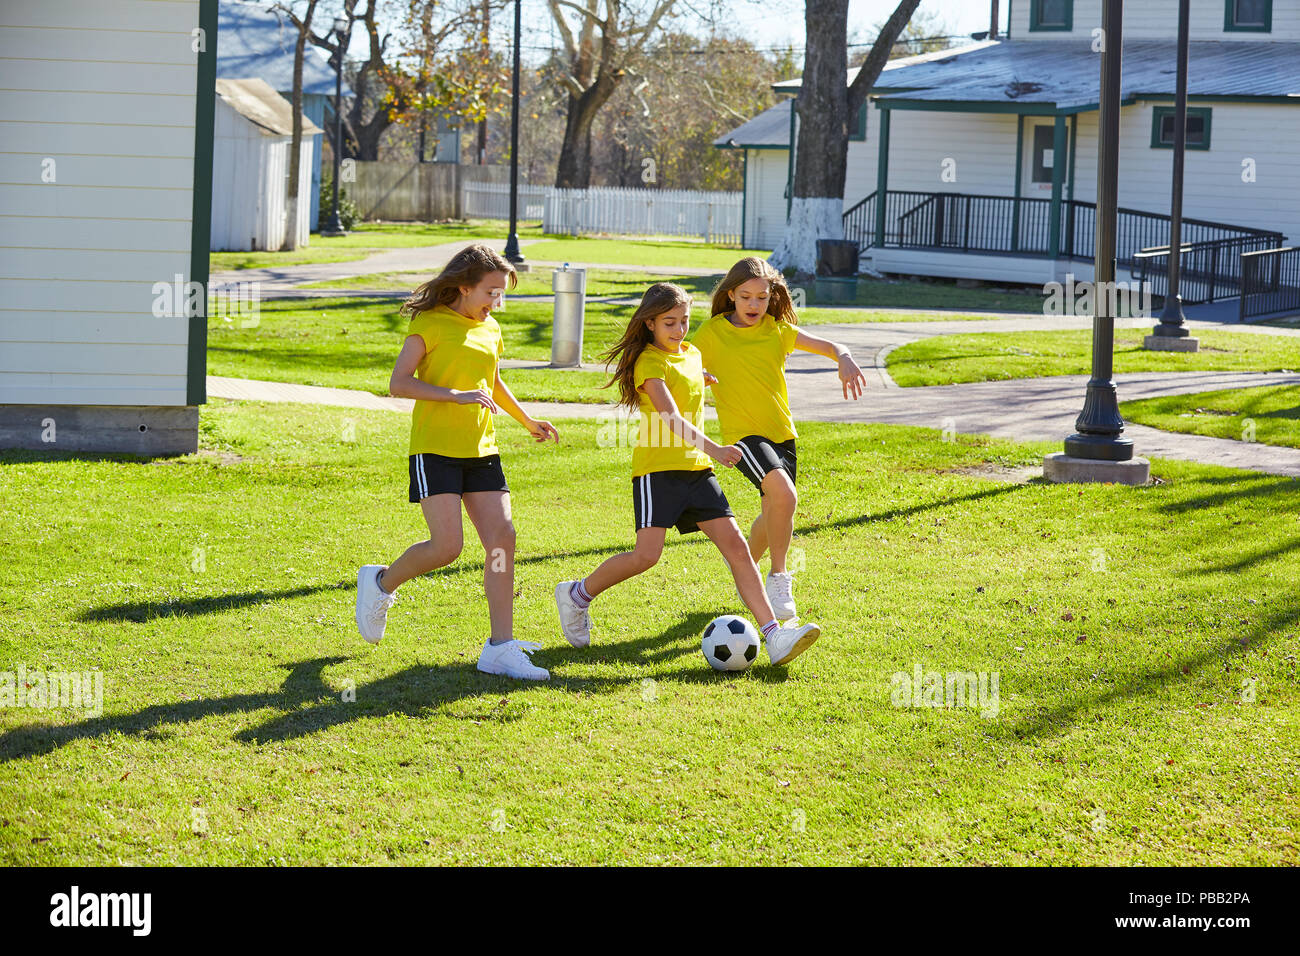 Friend girls teens playing football soccer in a park turf grass Stock Photo